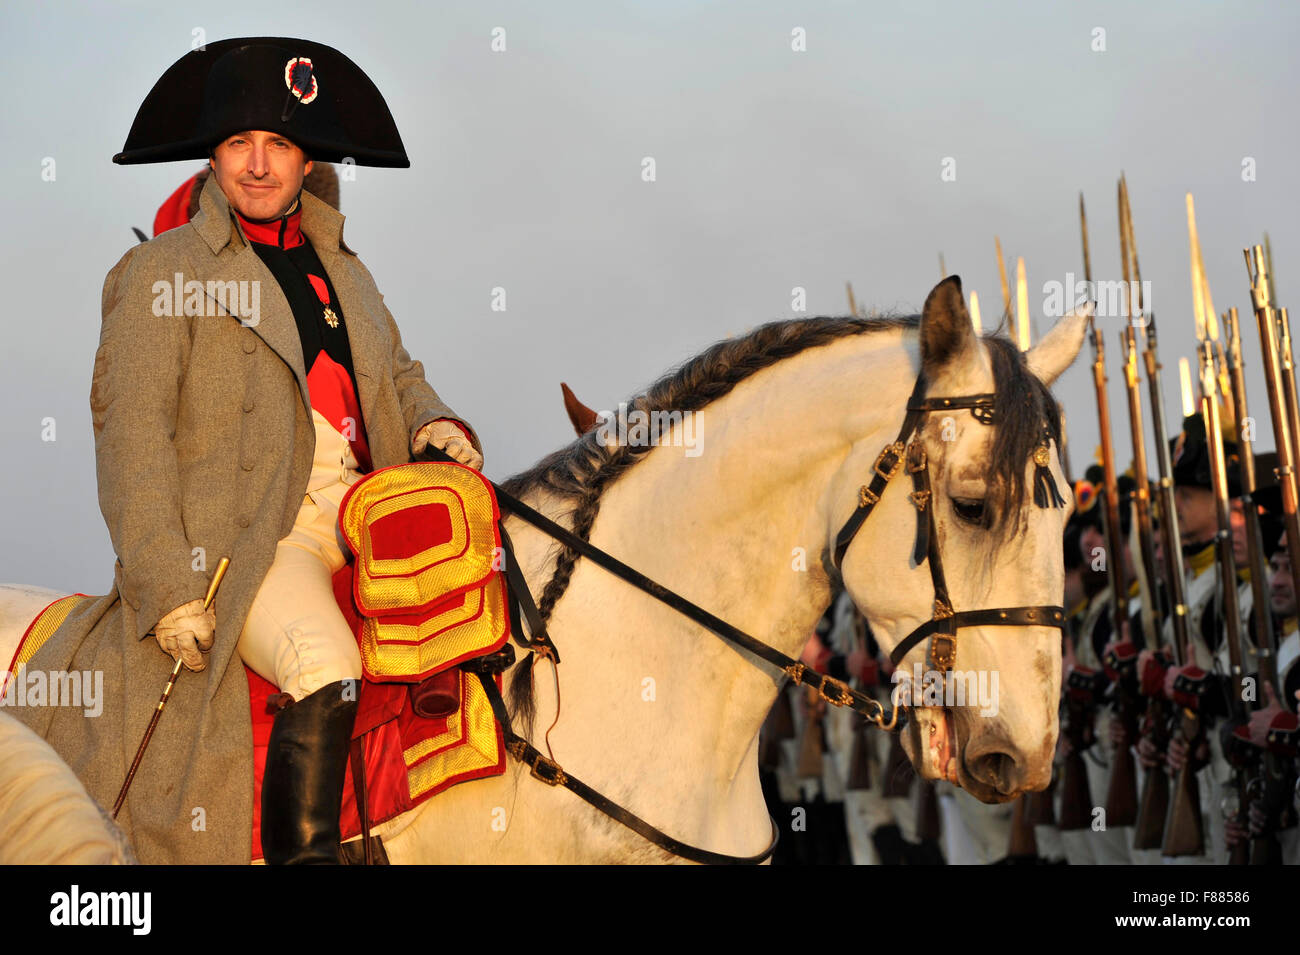 Tvarozna, Czech Republic. 05th Dec, 2015. Over 18,000 visitors watched the re-enactment of the Battle at Slavkov (Austerlitz), where the Napoleonic army scored a famous victory in 1805, which was staged by 2000 history fans in period uniforms today in Tvarozna, Czech republic, December 5, 2015. Pictured Mark Schneider as Napoleon. © Vaclav Salek/CTK Photo/Alamy Live News Stock Photo